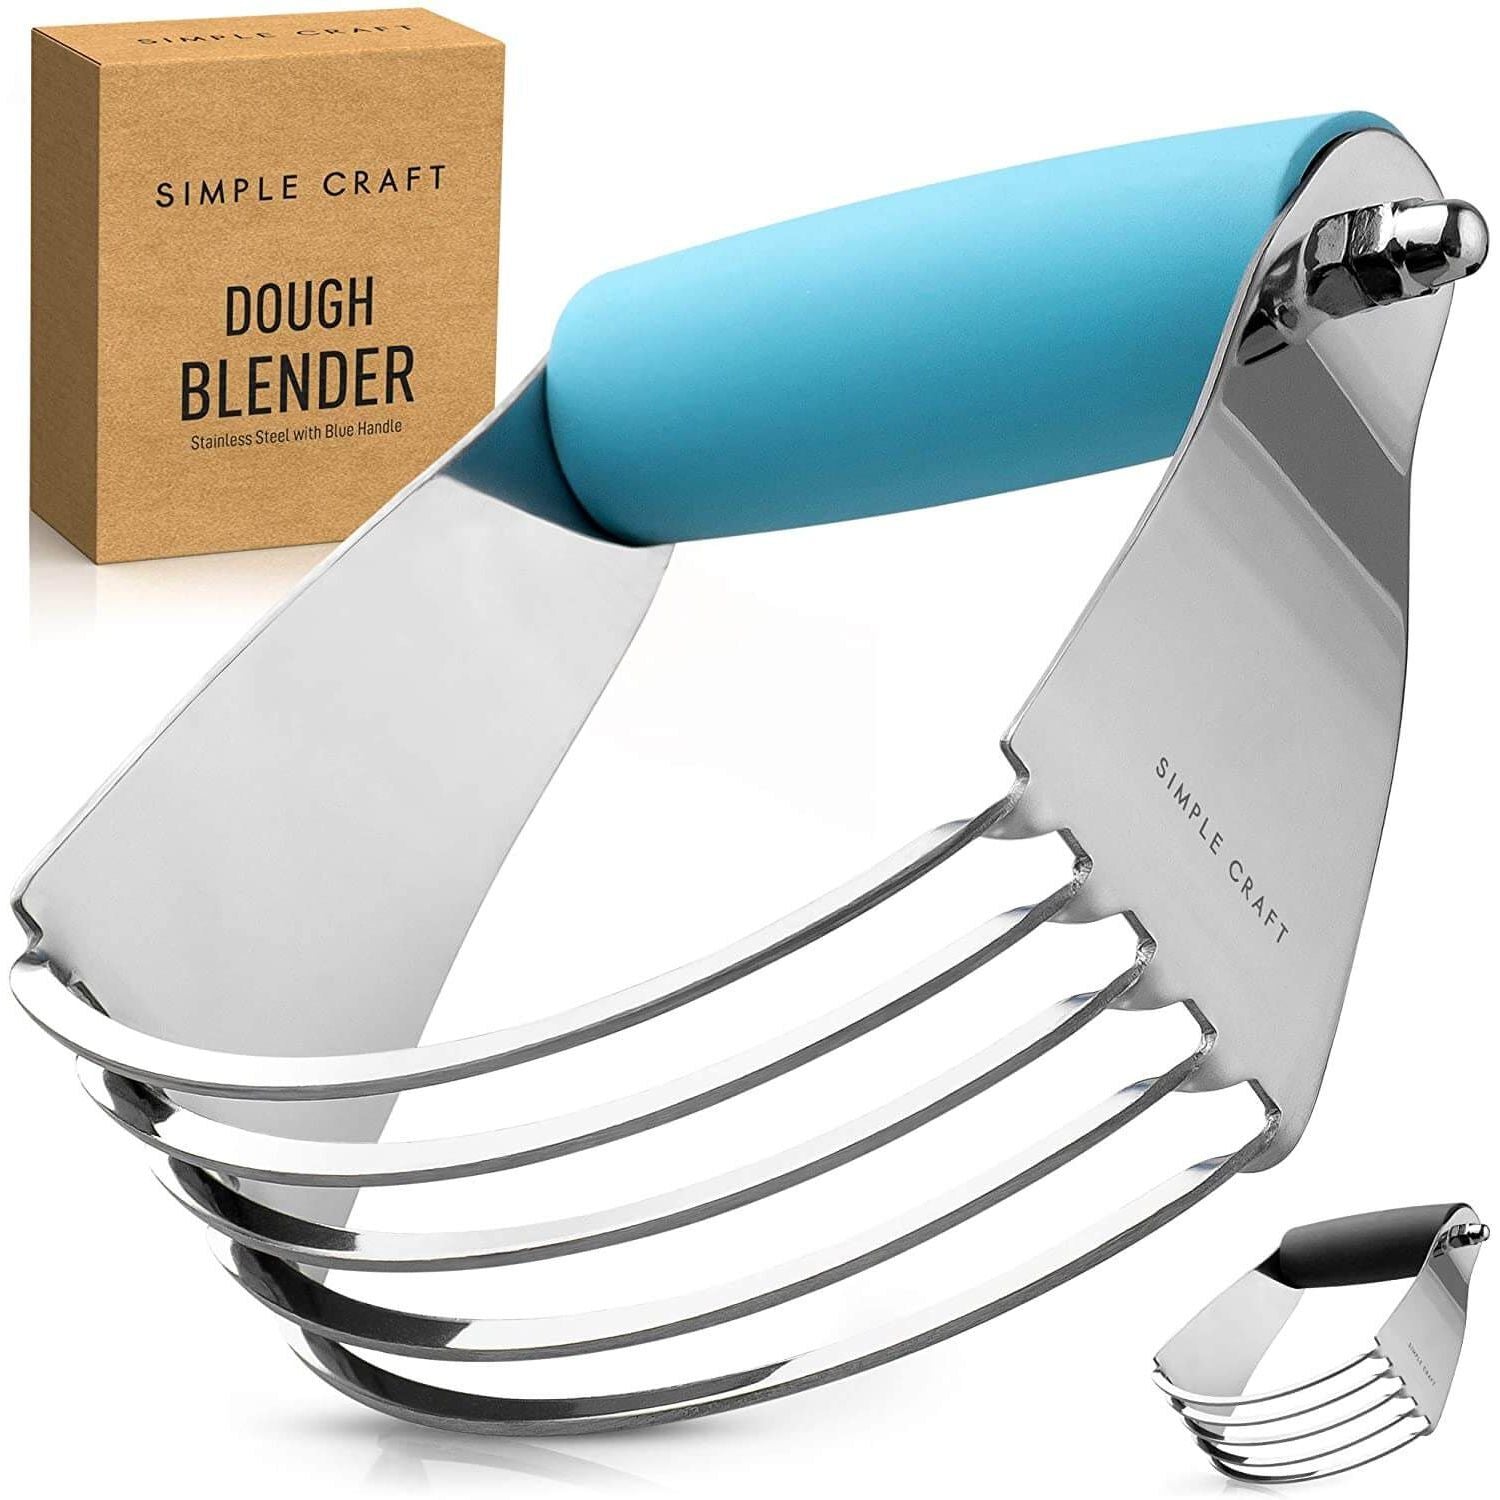 Simple Craft Pastry Dough Cutter with Comfortable Grip Handle - Blue